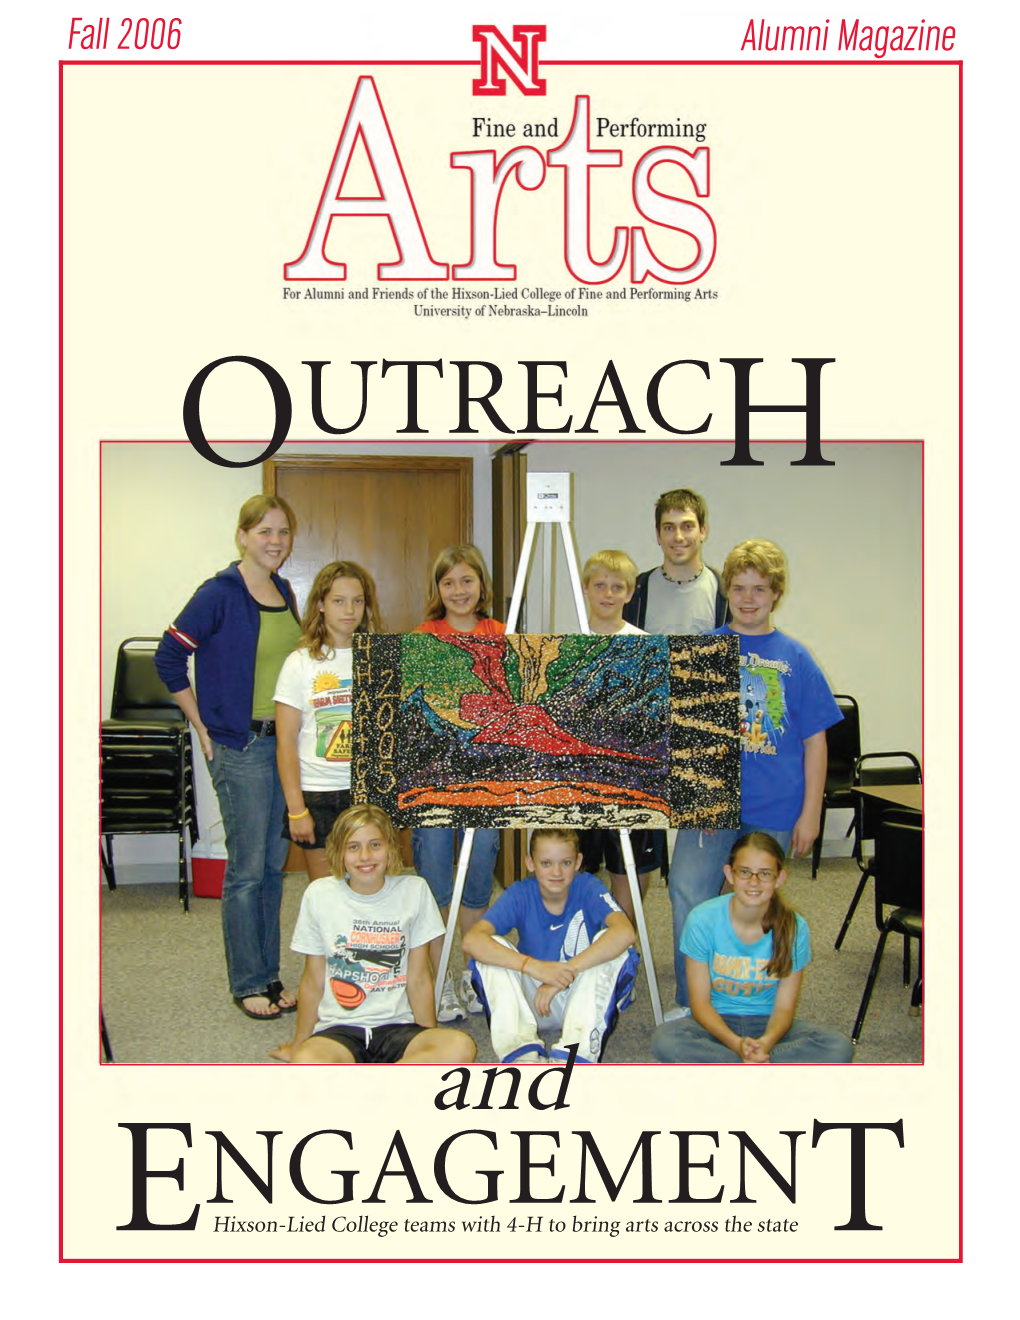 Engagement Outreach